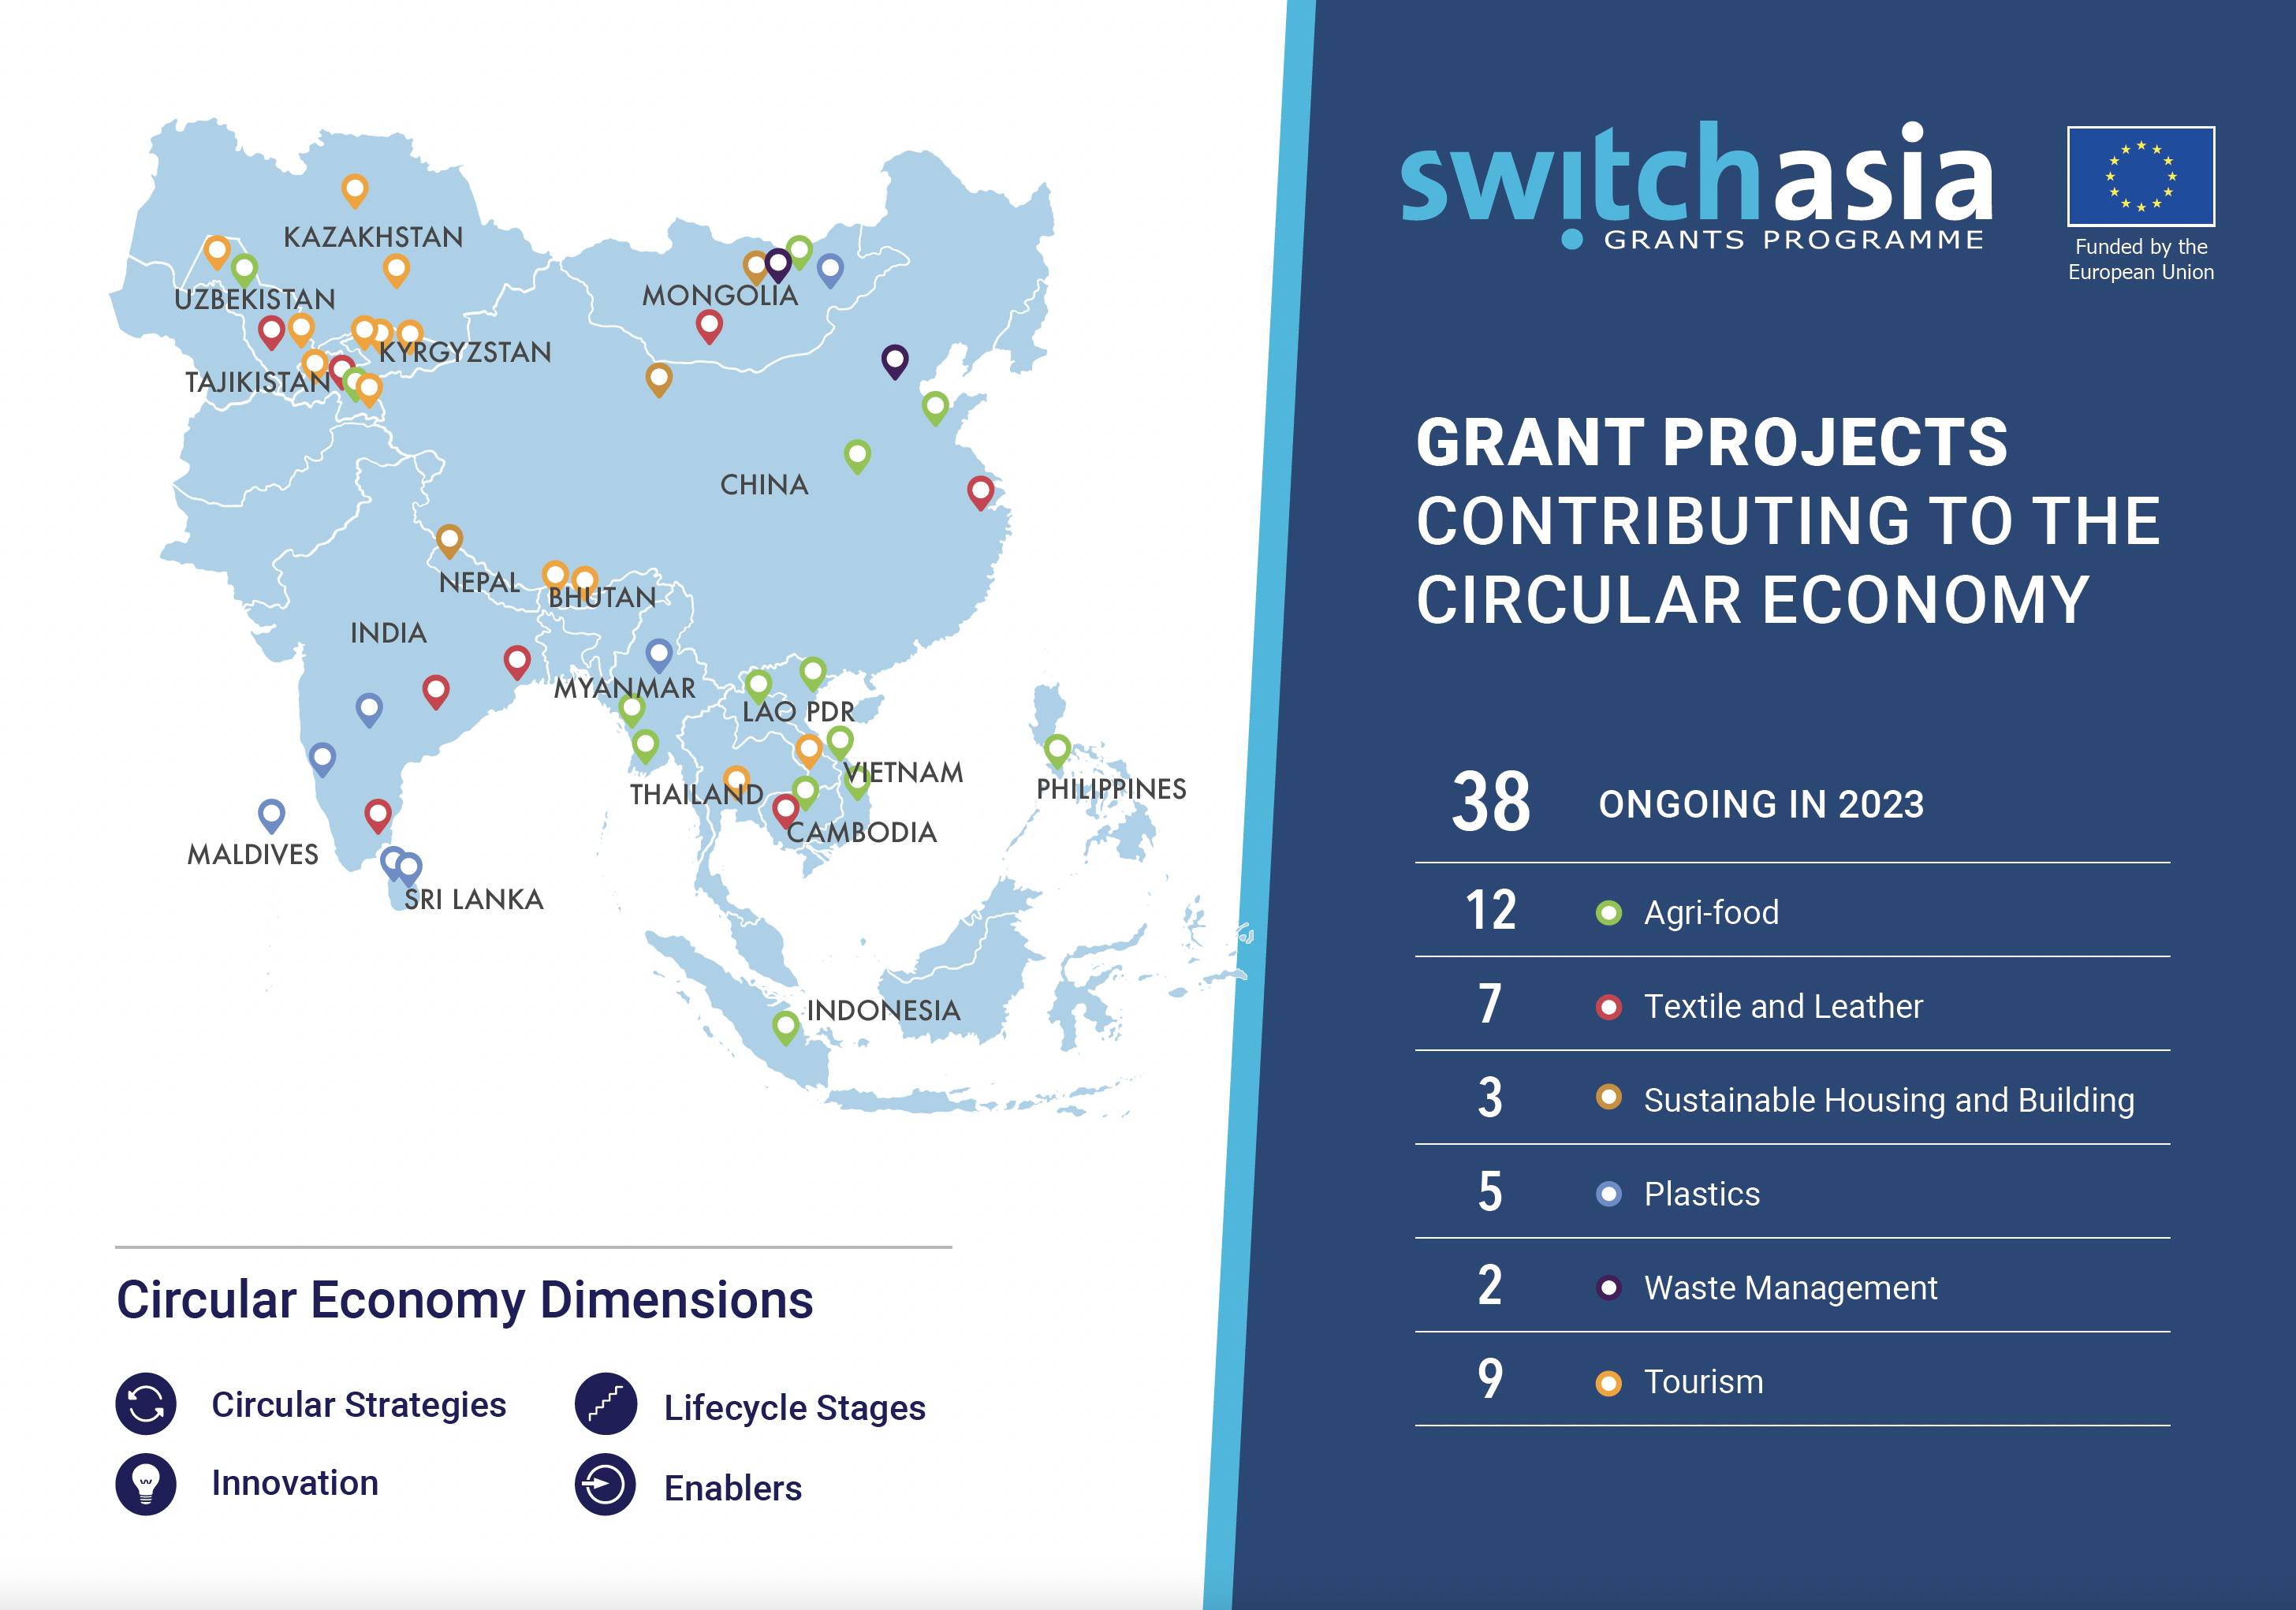 SWITCH-Asia Grant Projects Contributing to the Circular Economy